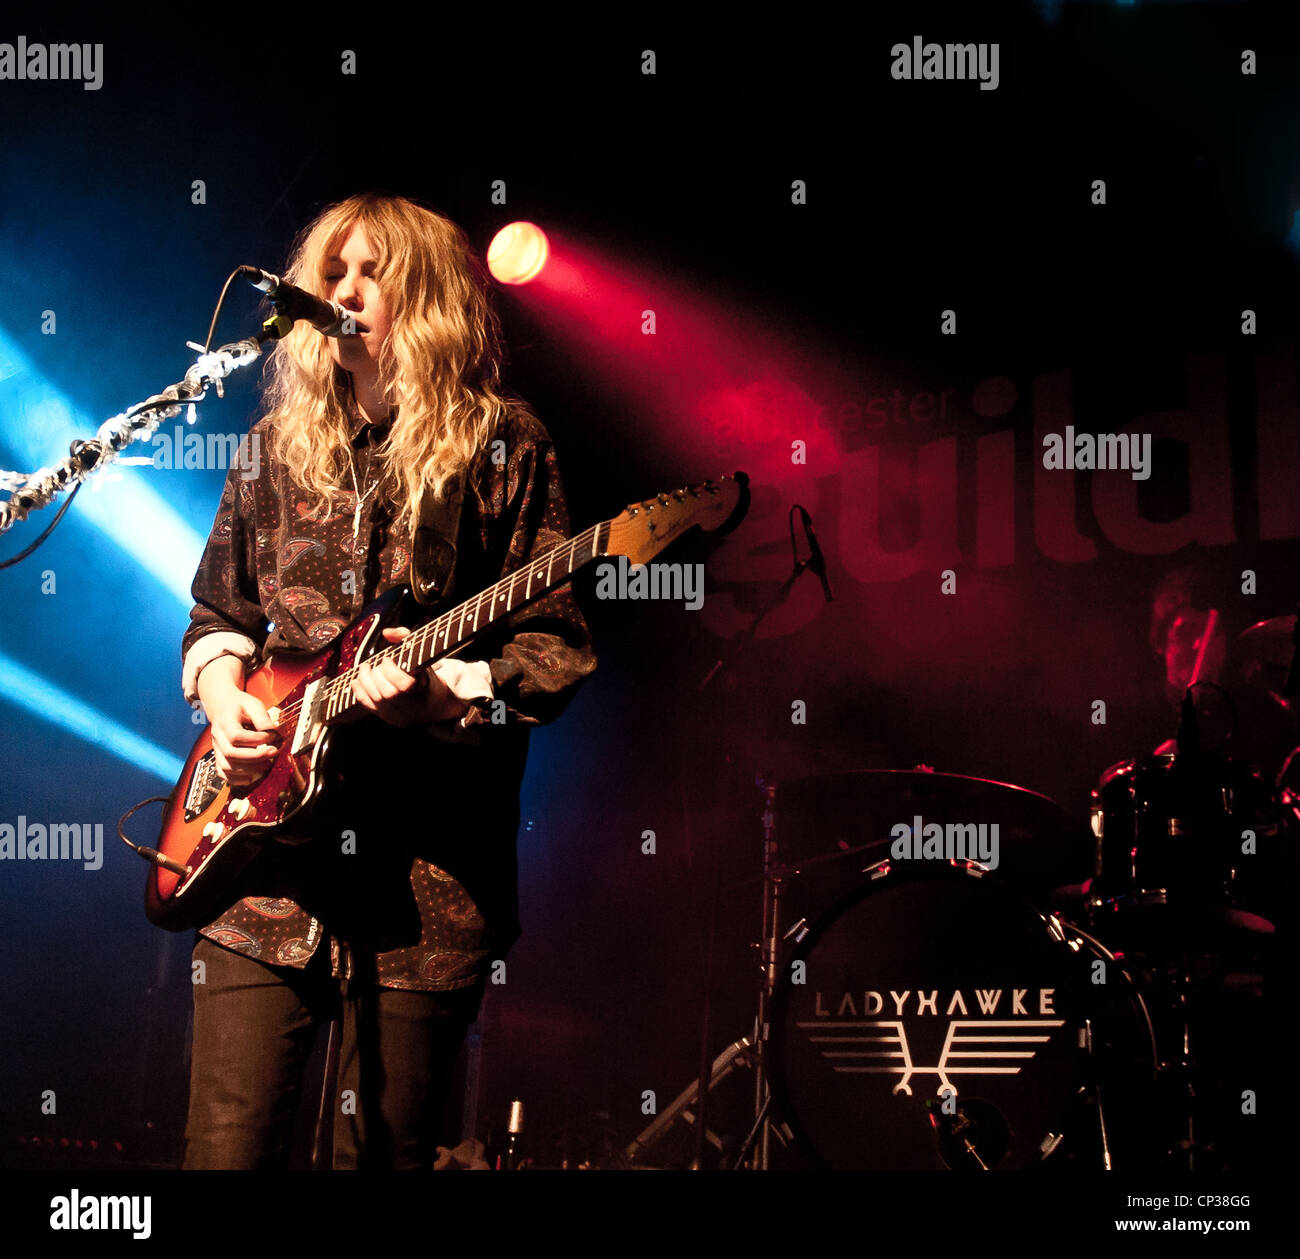 New Zealand singer & songwriter Ladyhawke at Gloucesters Guildhall Stock Photo